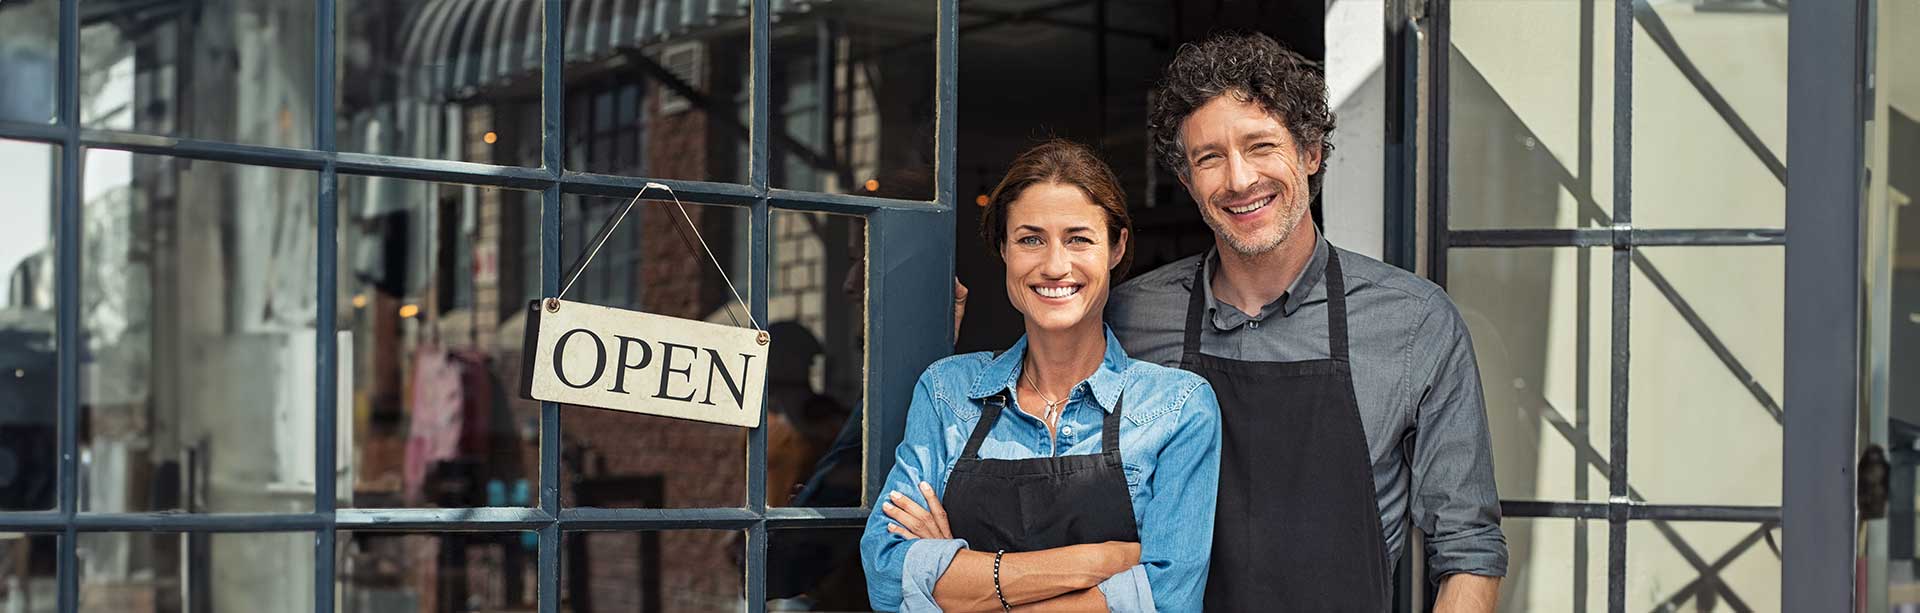 two business owners stand in front of their open sign | cash discount pos